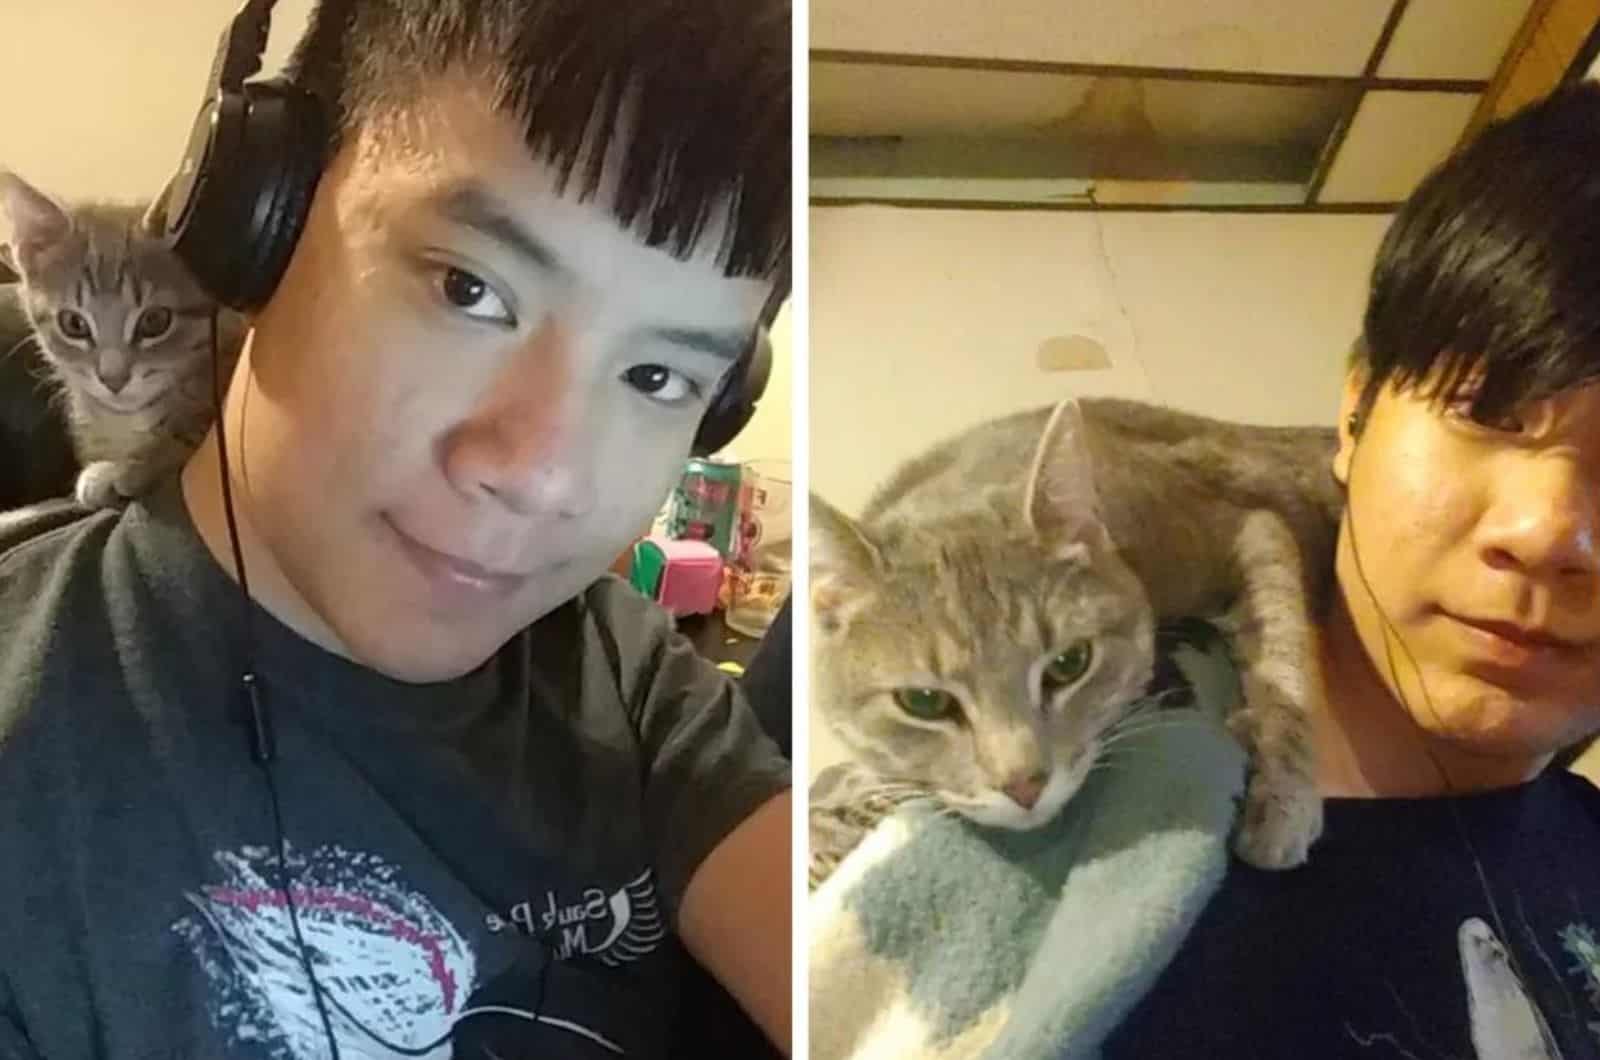 man gaming with cat next to him